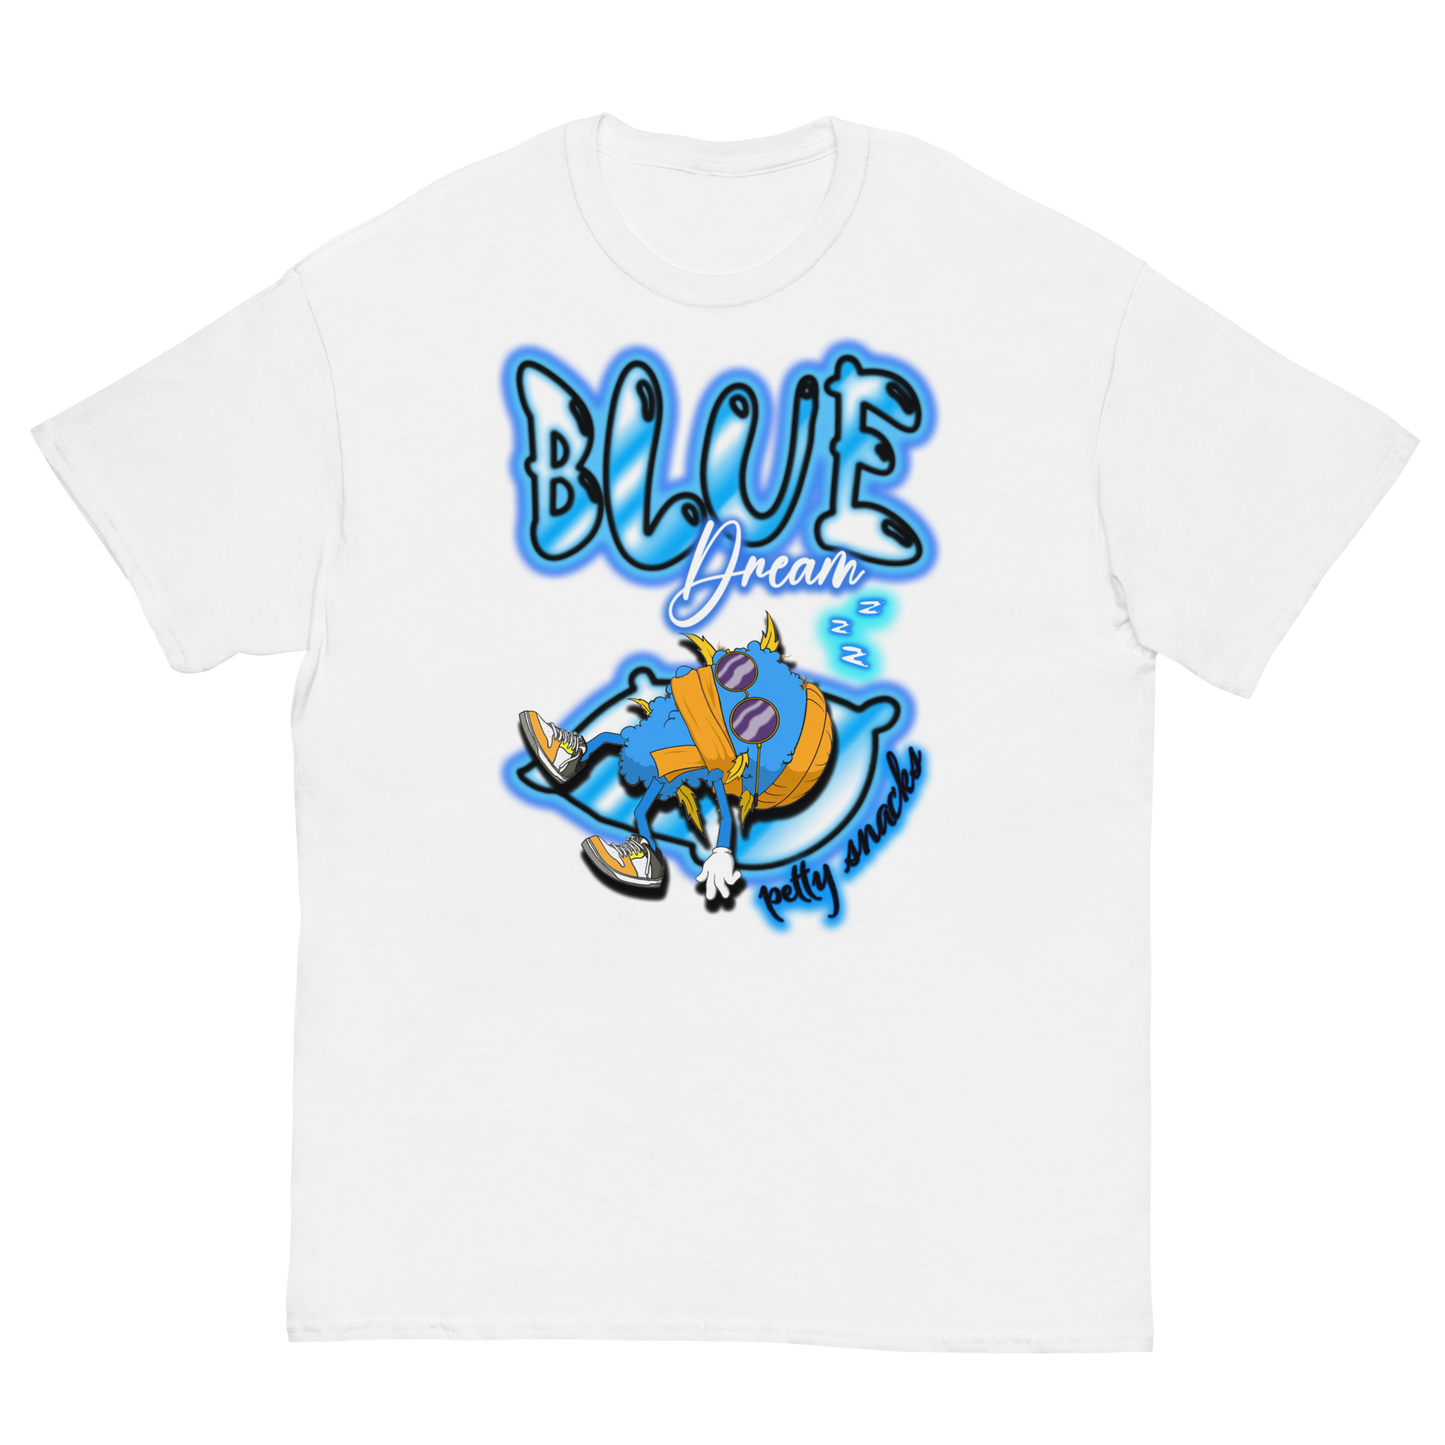 Second style. White tee. Big blue airbrush style lettering that reads "Blue Dream" on top. Below that, a blue weed nugget character wearing orange beanie sleeping on an pillow. The brand name "Petty Snacks" is under the pillow in small airbrush style